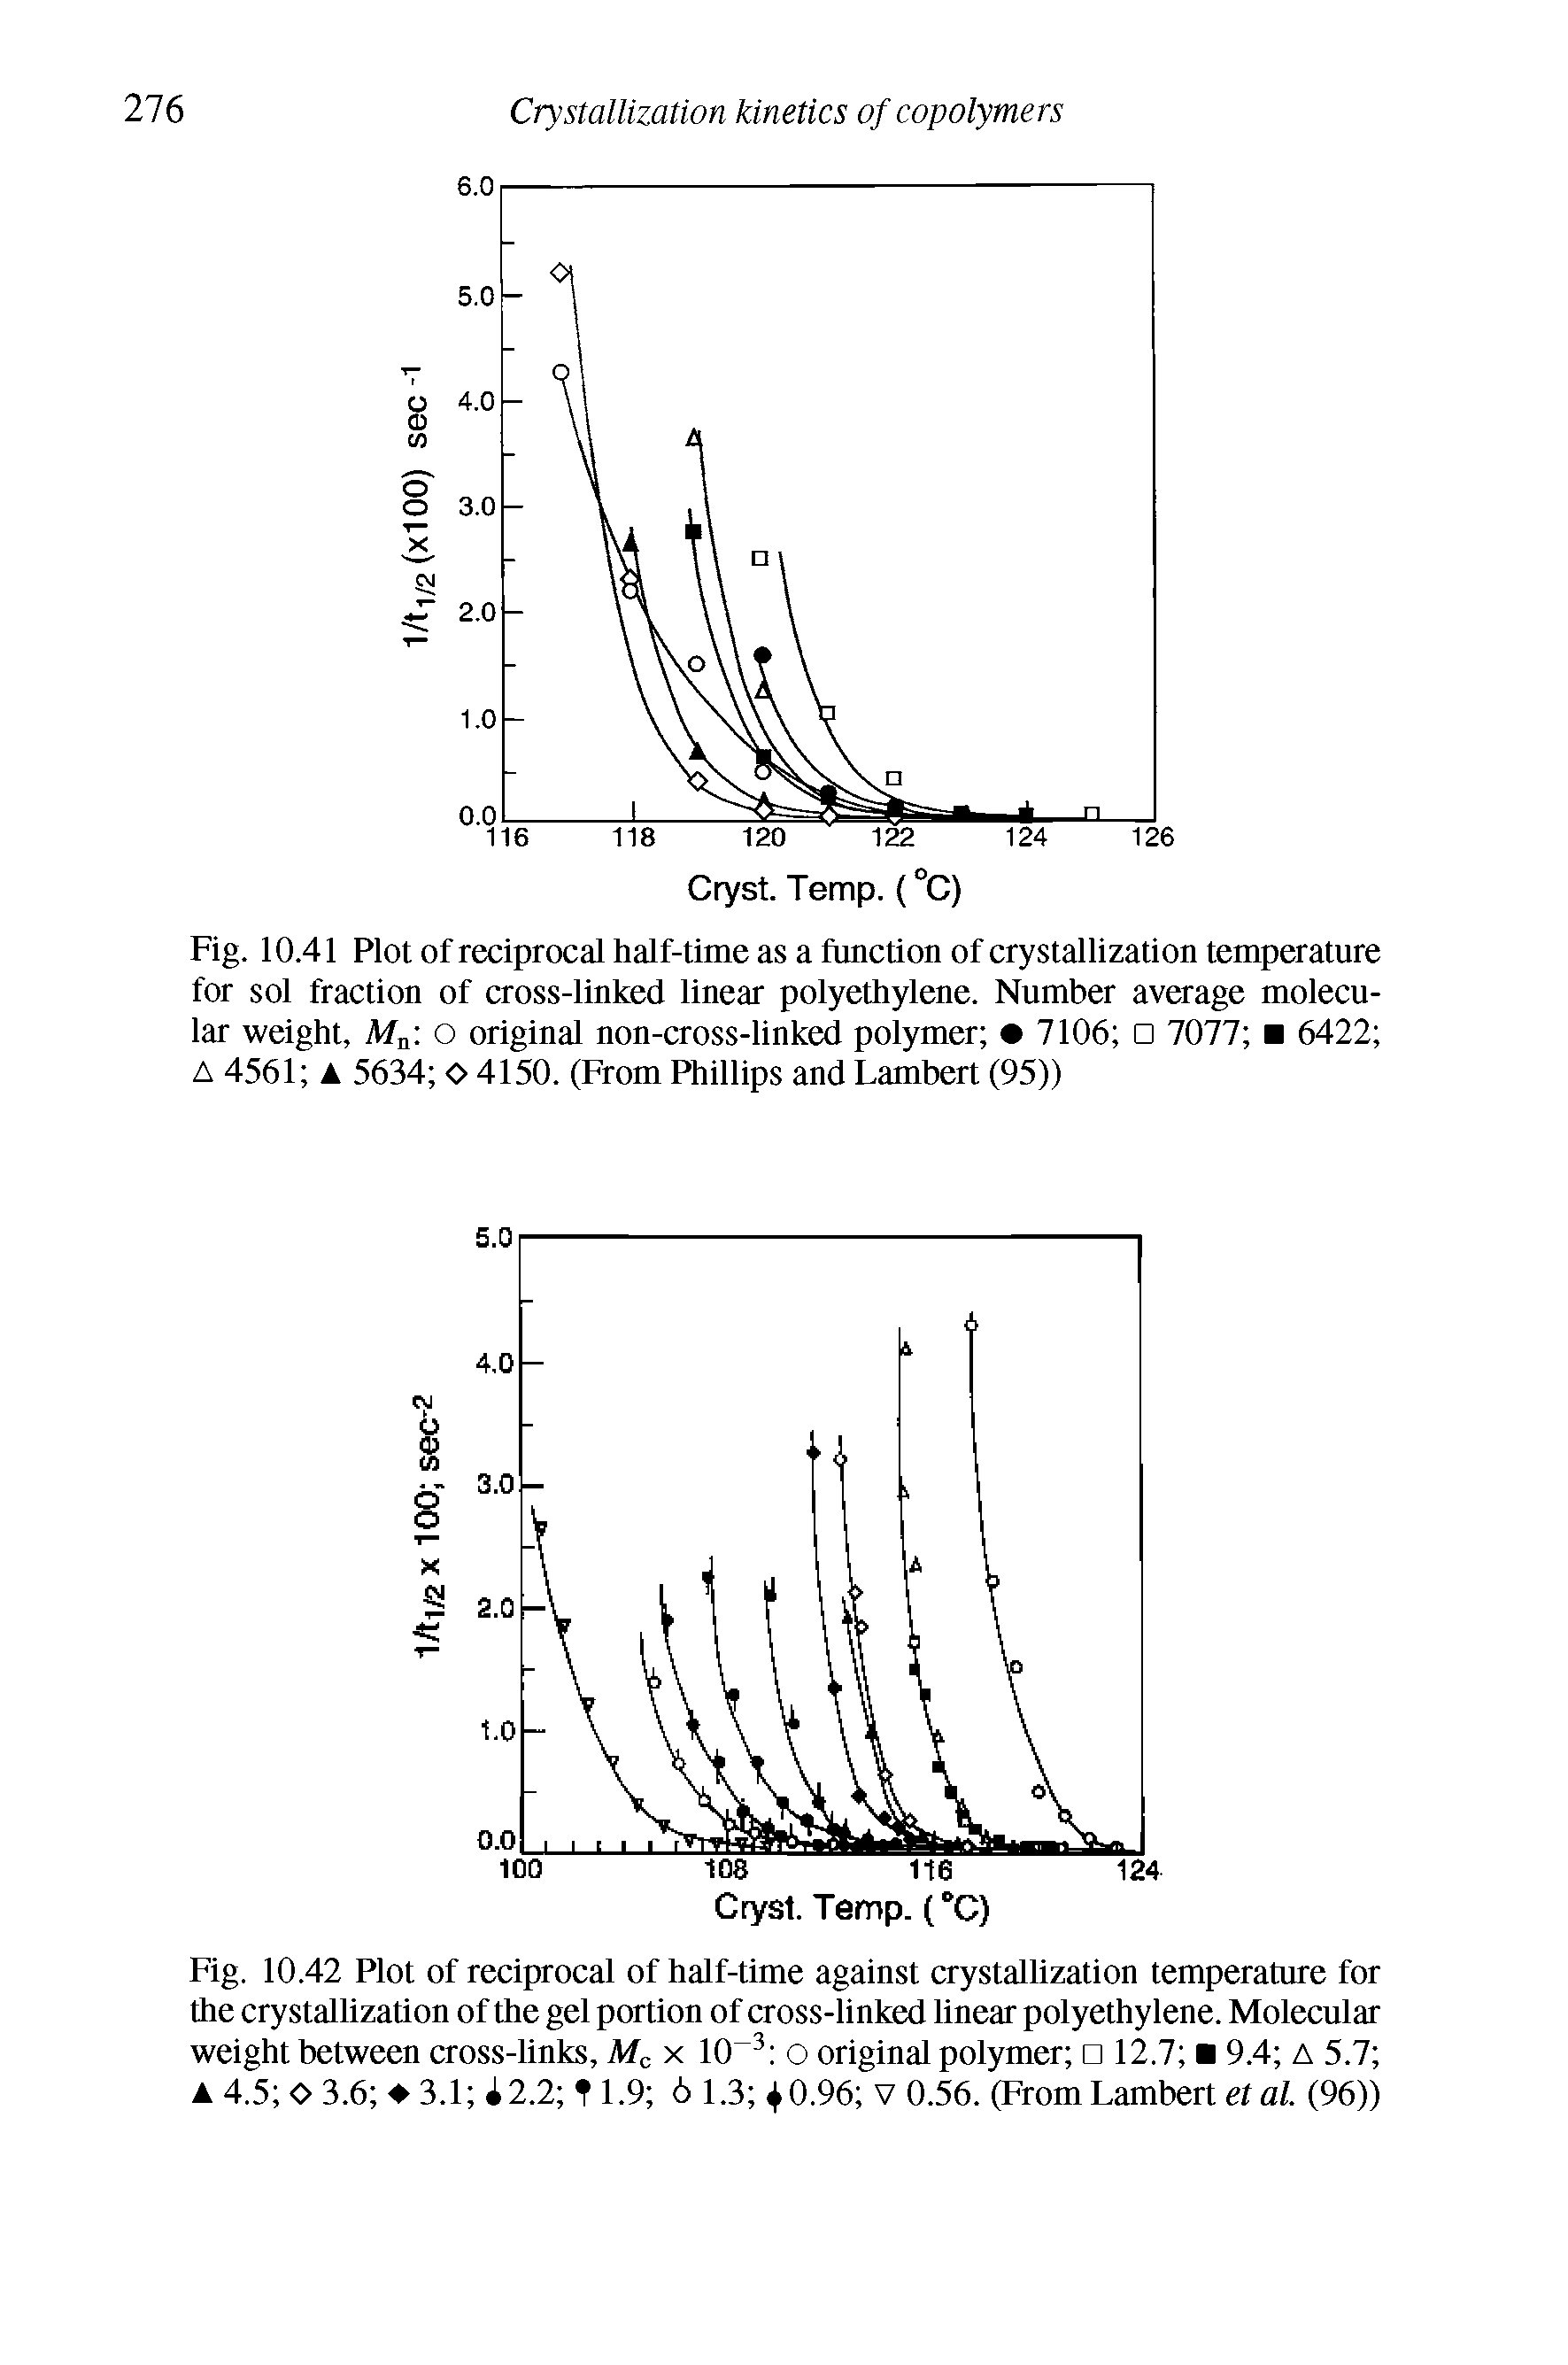 Fig. 10.41 Plot of reciprocal half-time as a function of crystallization temperature for sol fraction of cross-linked linear polyethylene. Number average molecular weight, Afni o original non-cross-linked polymer 7106 7077 6422 A 4561 A 5634 o 4150. (From Phillips and Lambert (95))...